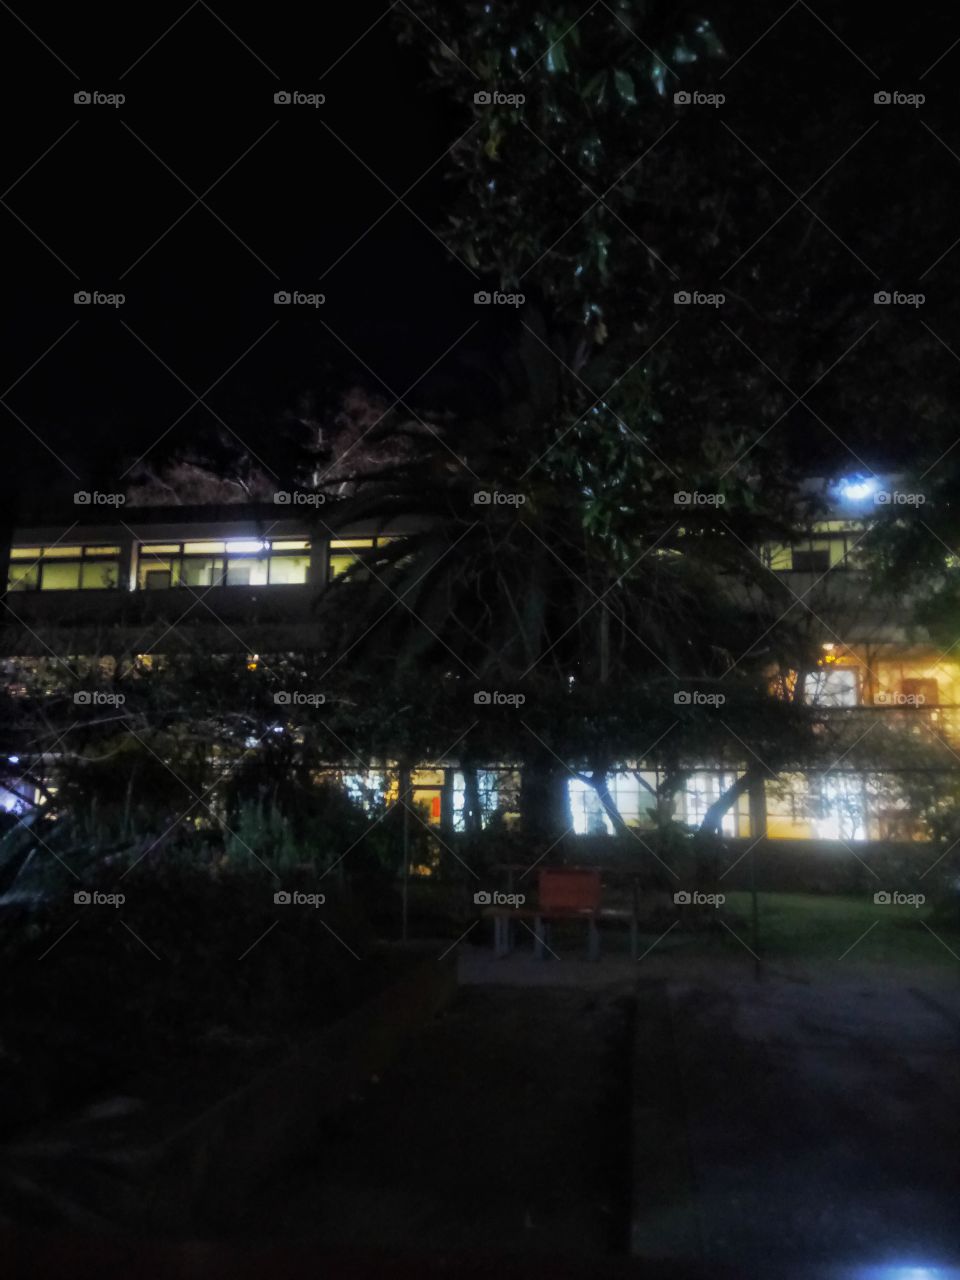 Faculty of psychology at night